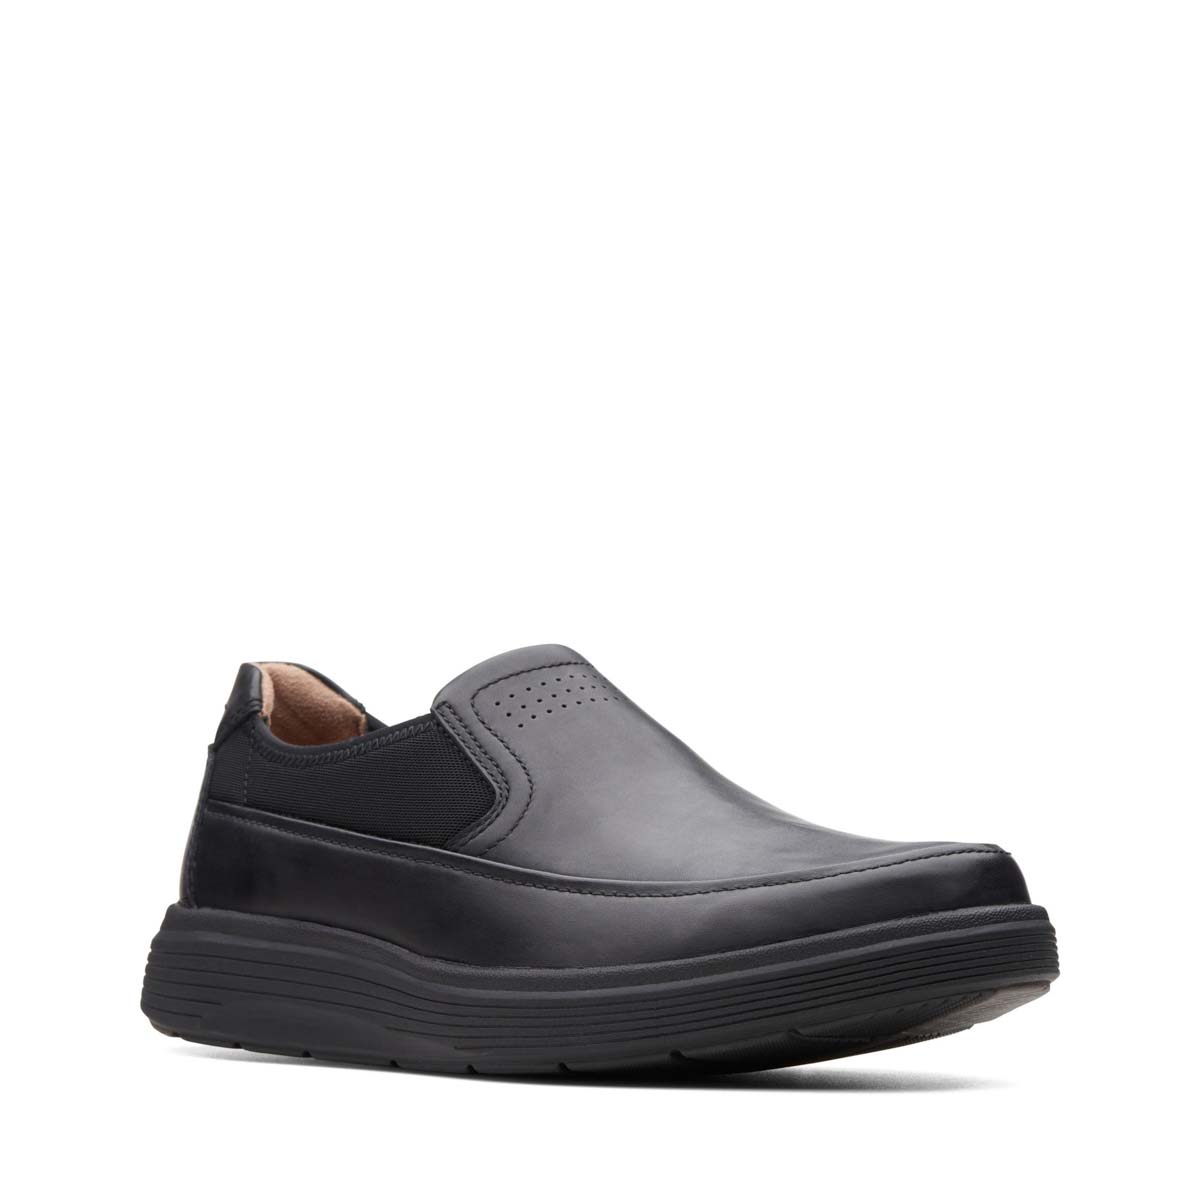 Clarks Un Abode Go Black leather Mens Slip-on Shoes 3707-67G in a Plain Leather in Size 11